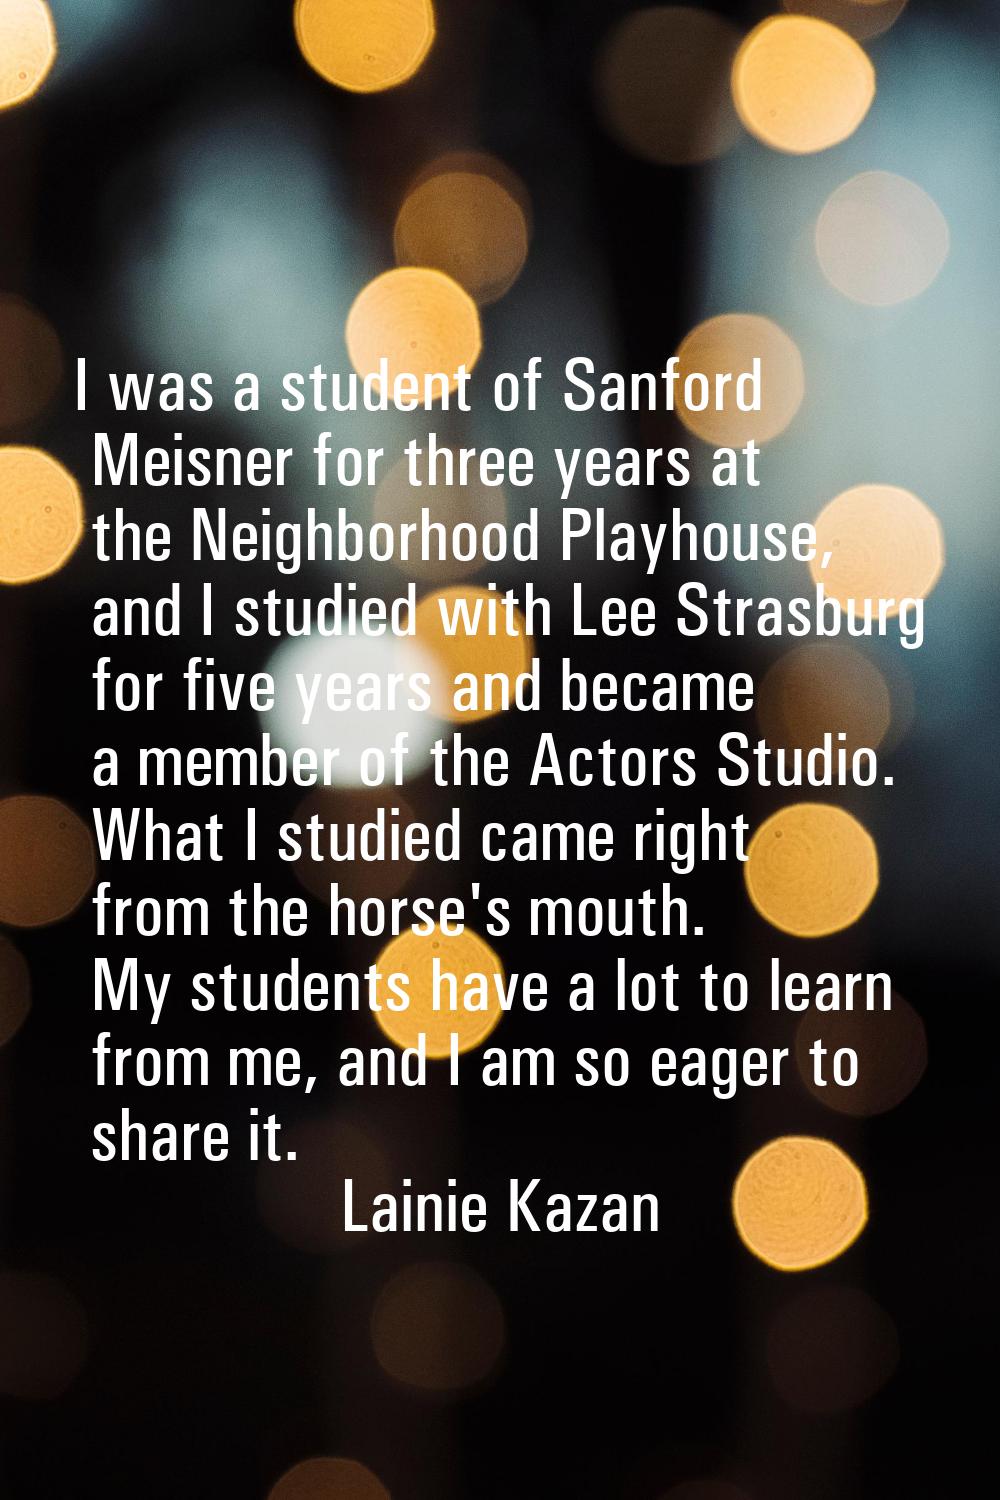 I was a student of Sanford Meisner for three years at the Neighborhood Playhouse, and I studied wit